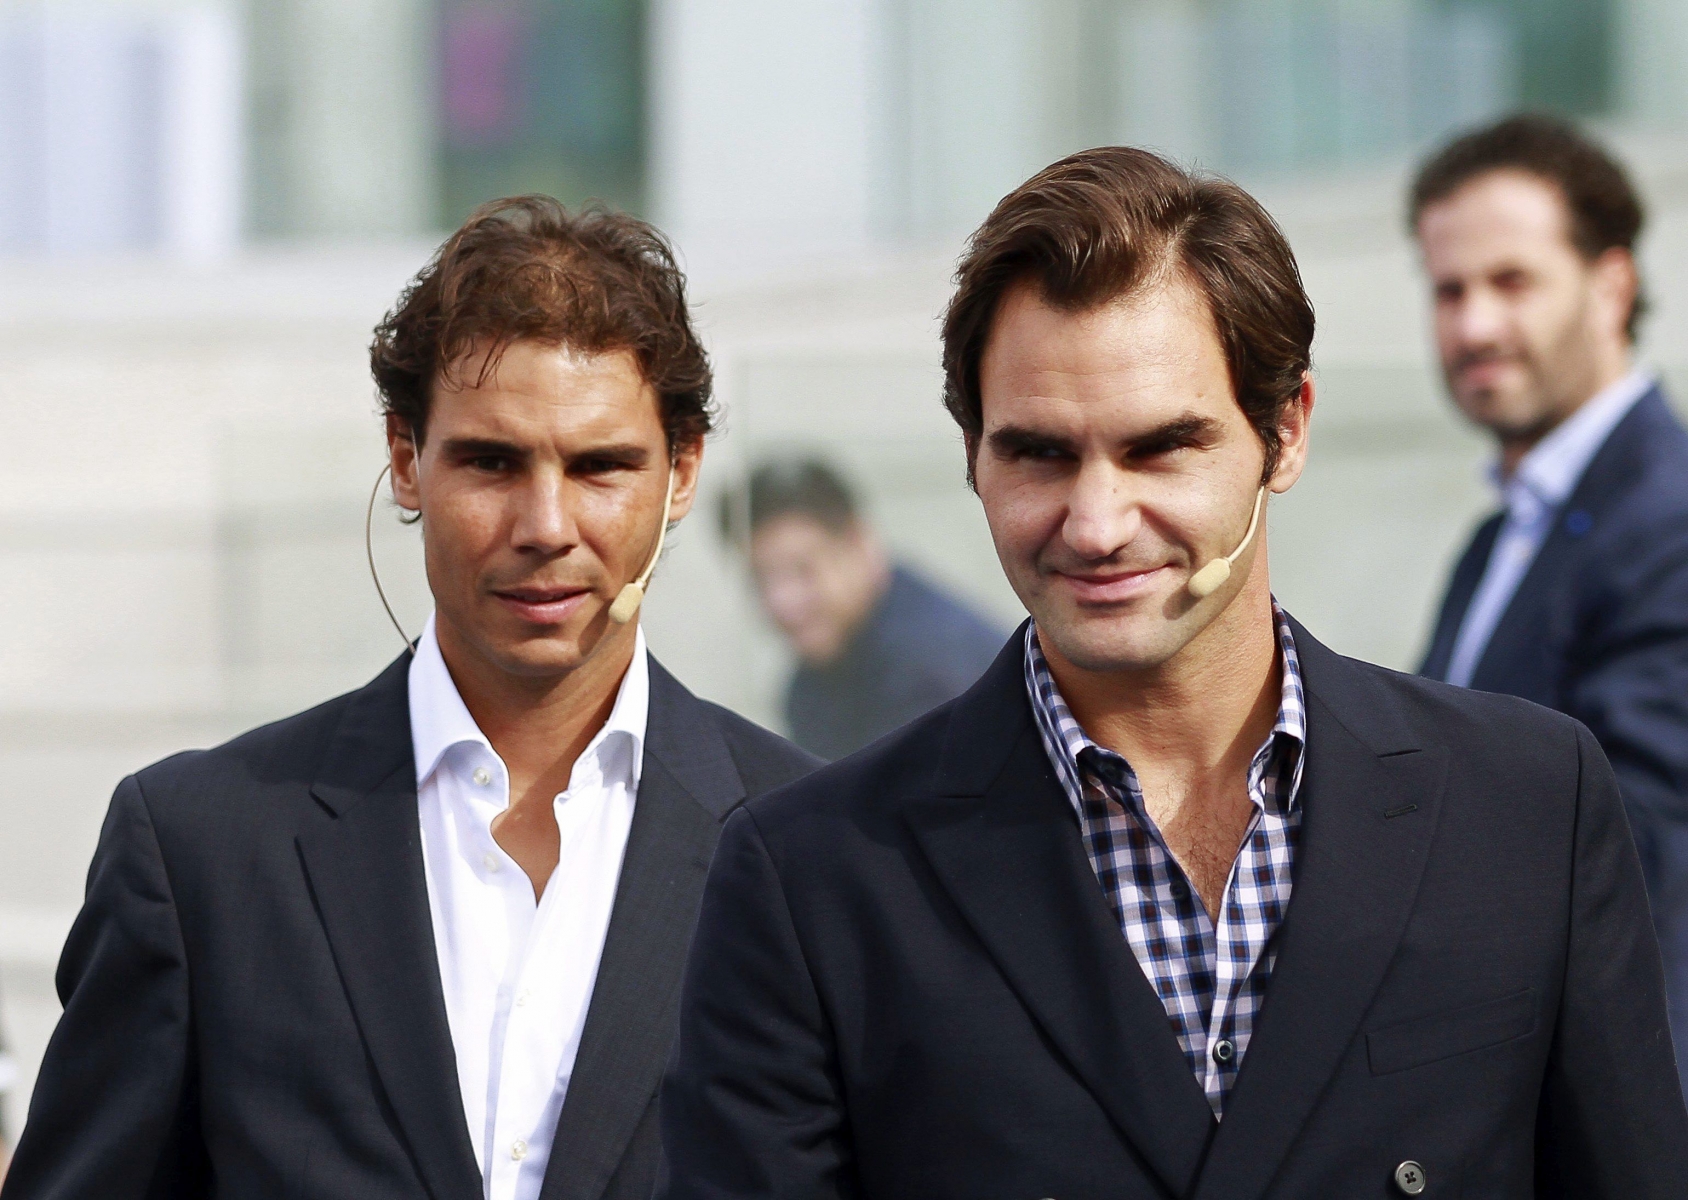 epa05591978 Spanish tennis player Rafael Nadal (L) and Swiss player Roger Federer (R) arrive to chair the opening ceremony of the Rafa Nadal Academy in Manacor, Mallorca island, Balearics, Spain, 19 October 2016. The academy opens its doors to young players so as they can train with the same method and values with which Nadal grew up.  EPA/J. GRAPPELLI